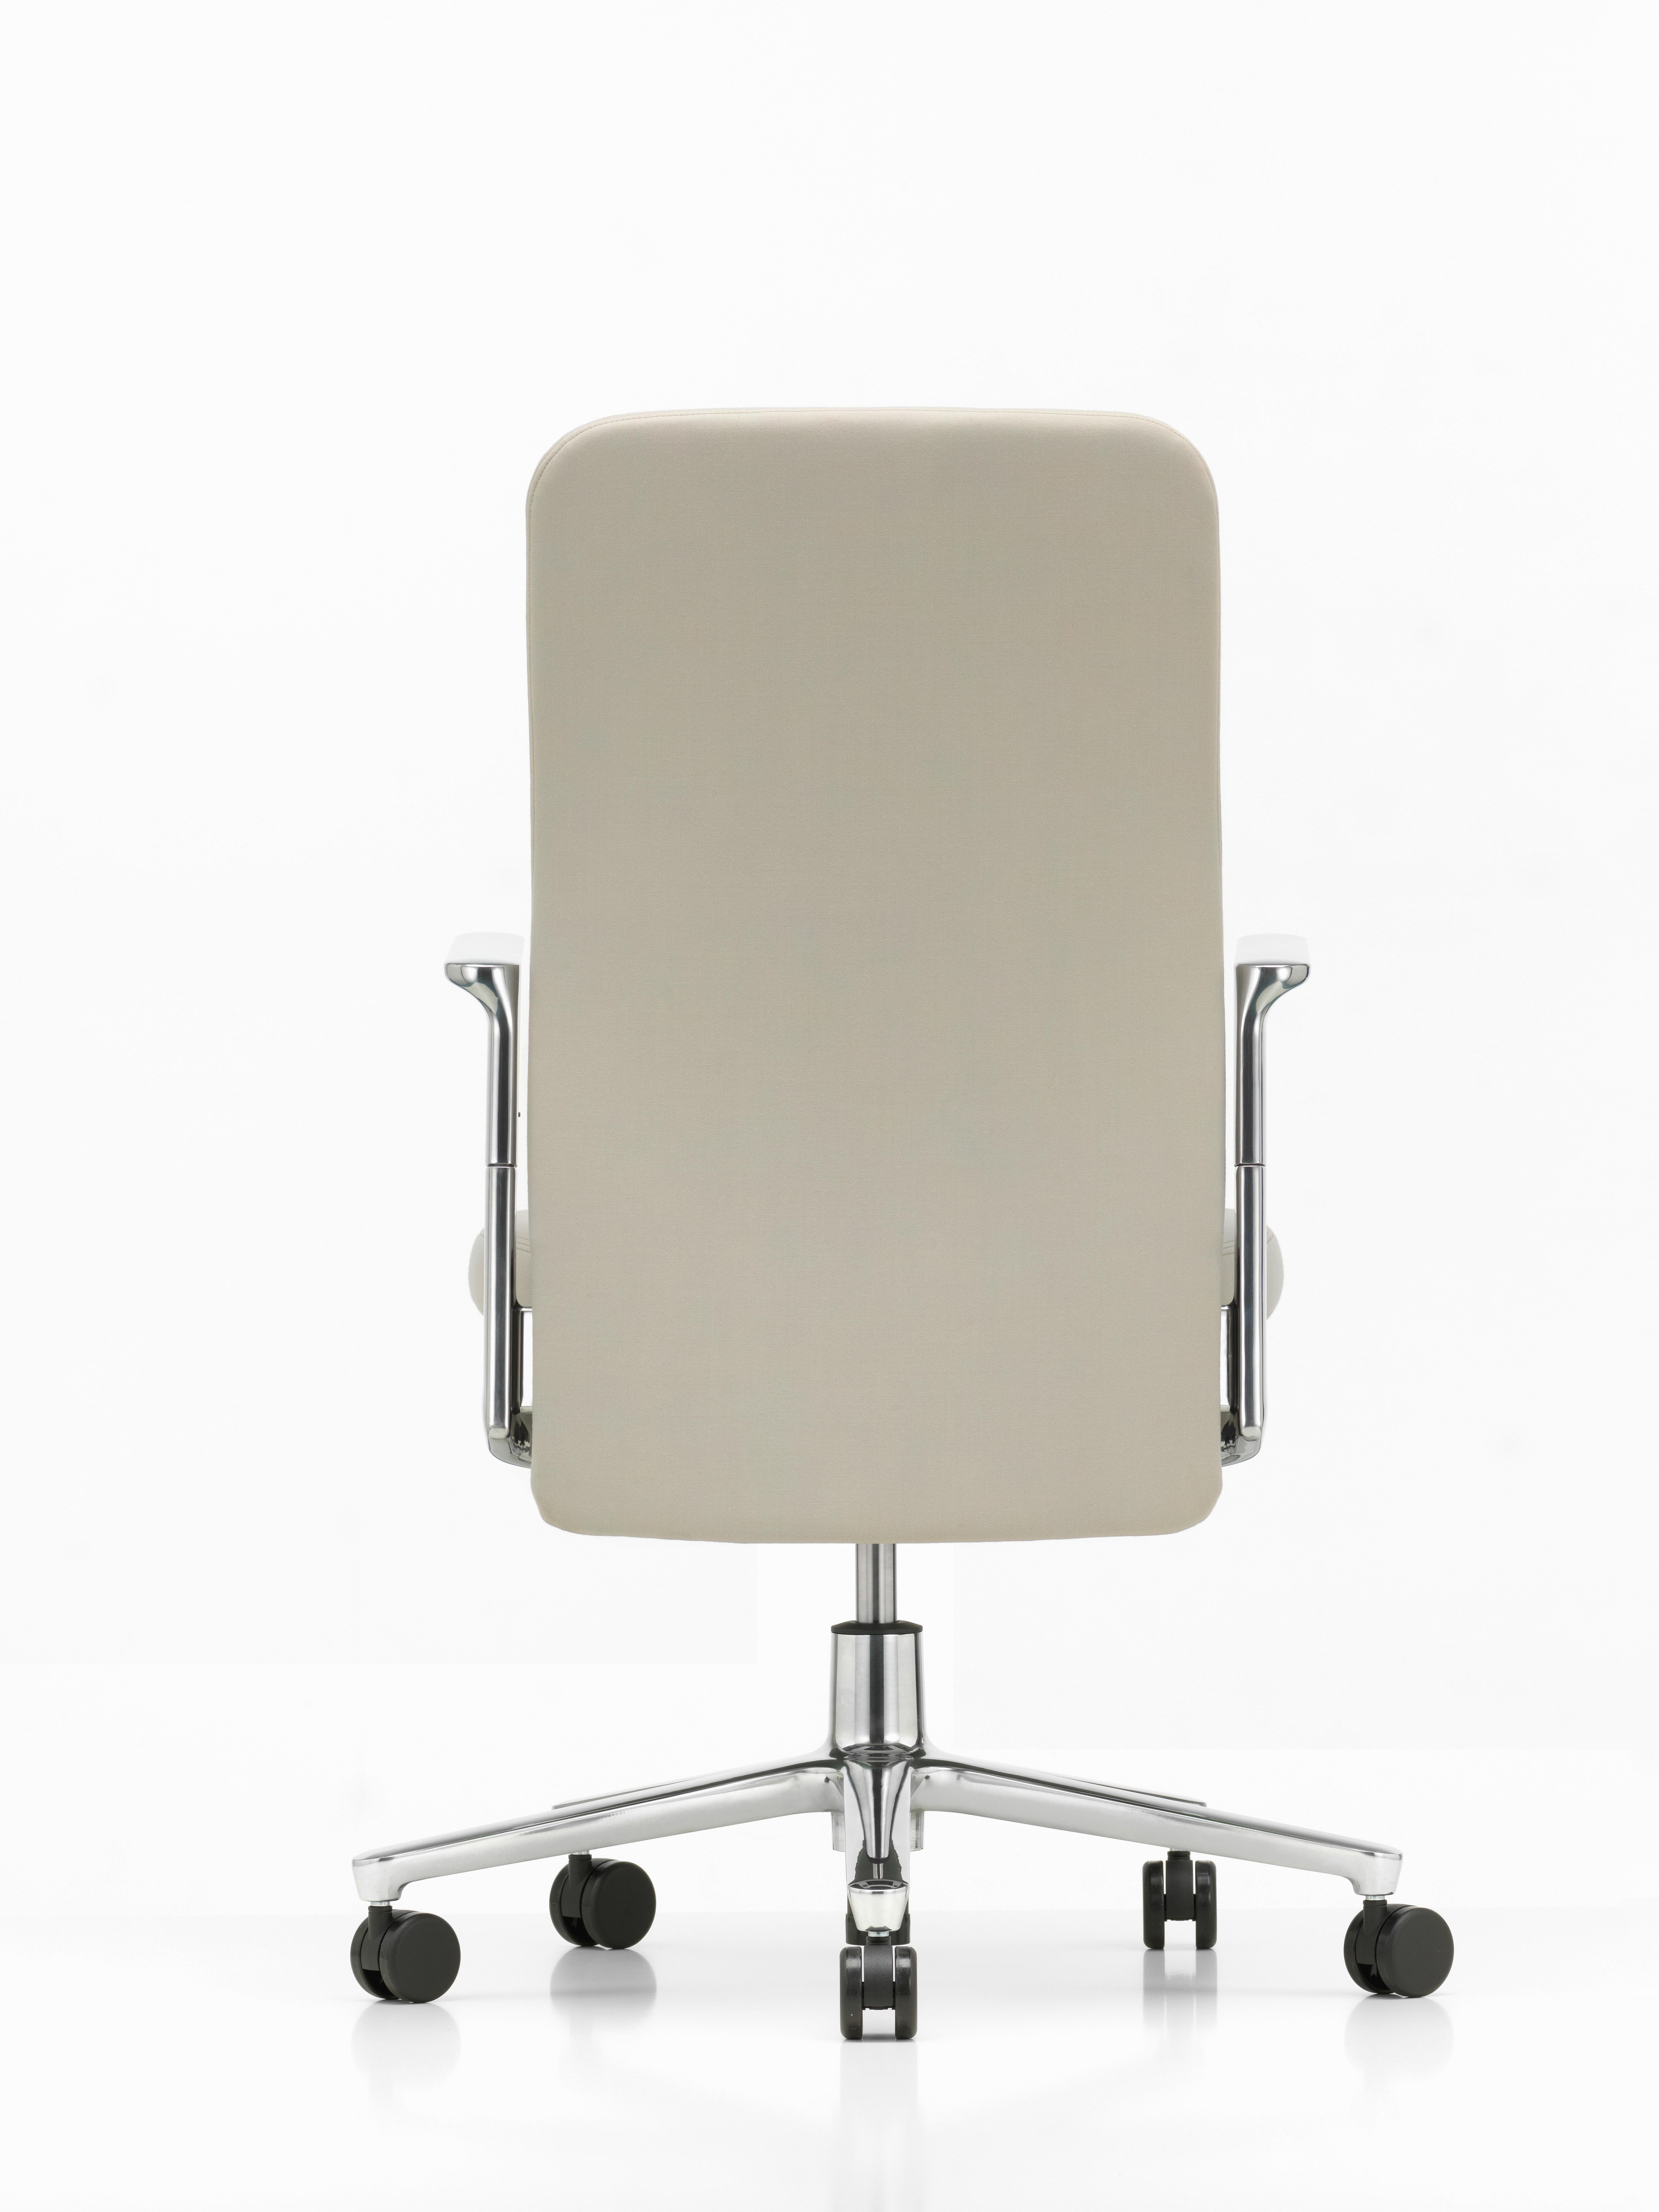 Swiss Vitra Pacific Medium Upholstered Backrest Chair by Edward Barber & Jay Osgerby For Sale